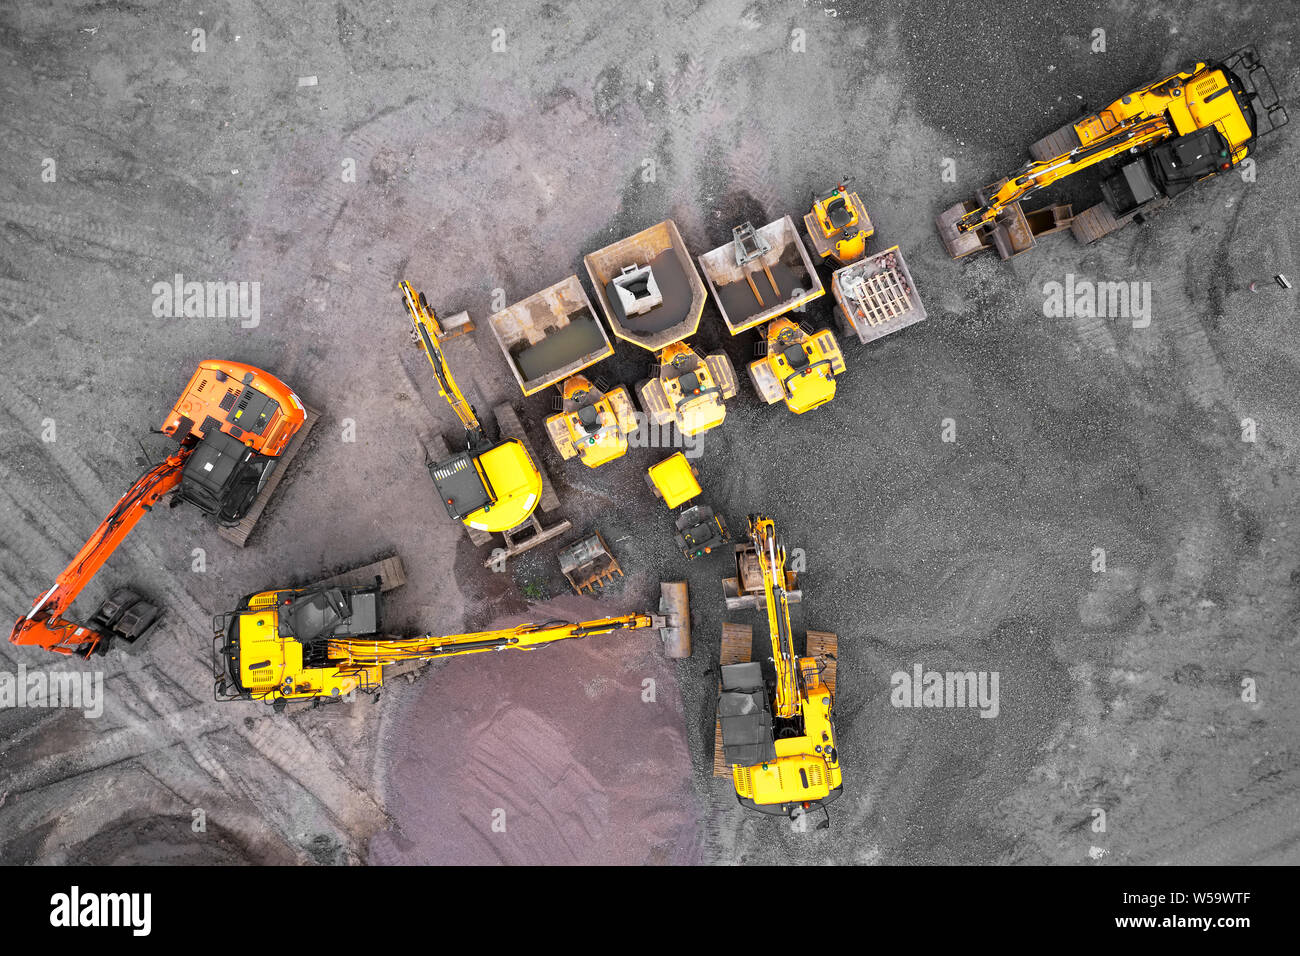 Construction site diggers yellow and orange aerial view from above Stock Photo